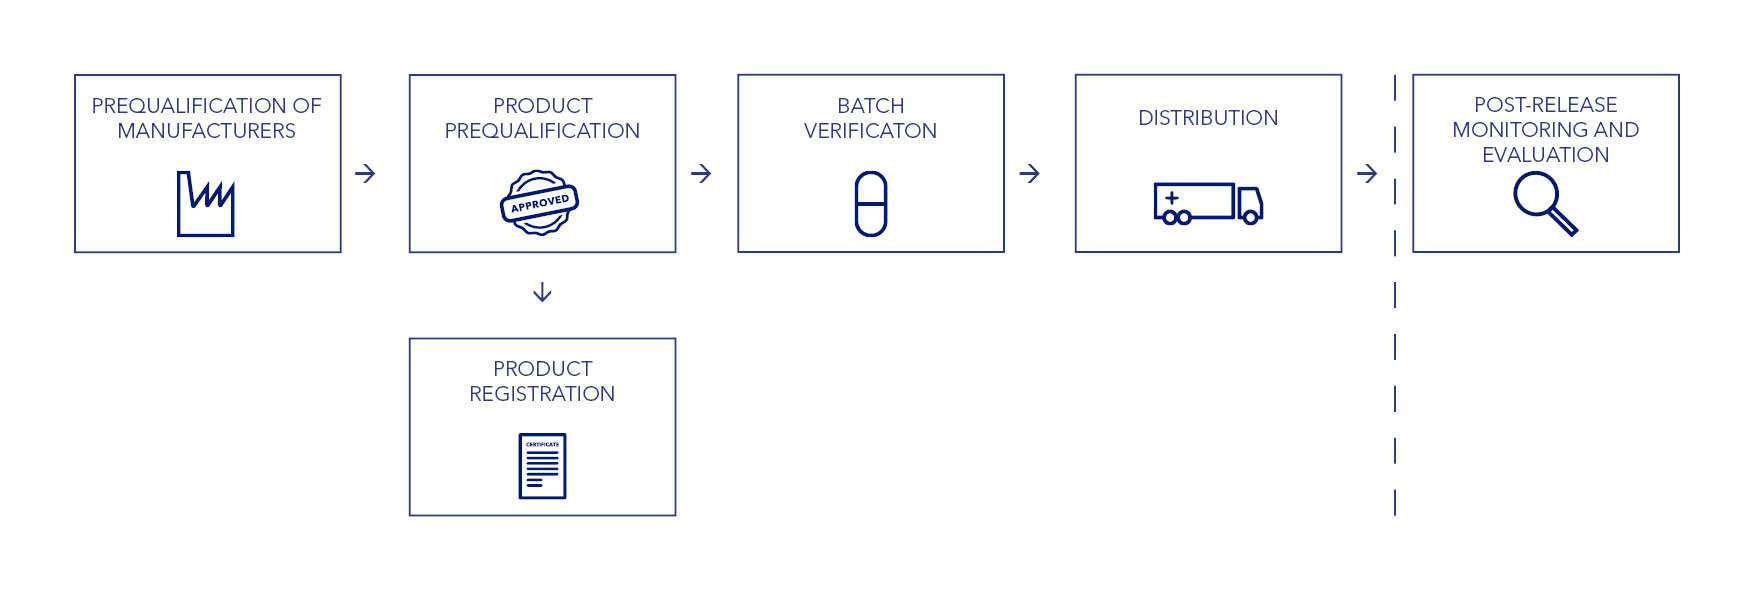 Process chart for steps in QA product verification